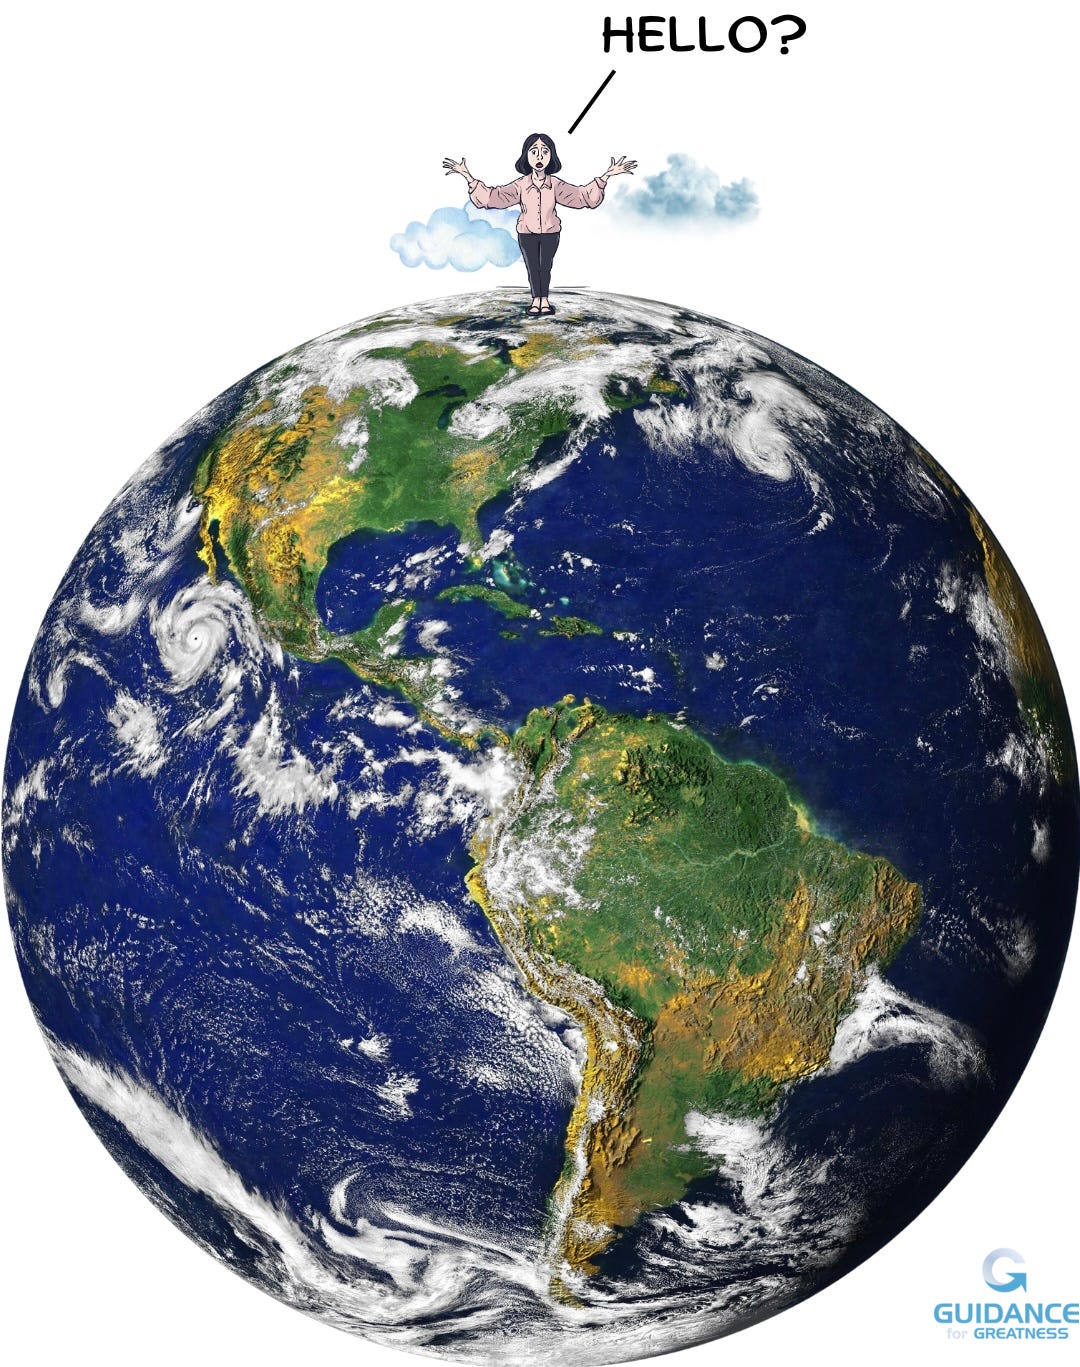 A small cartoon woman shrugging with two clouds behind her. She is standing on top of a globe all alone and asking “hello?”